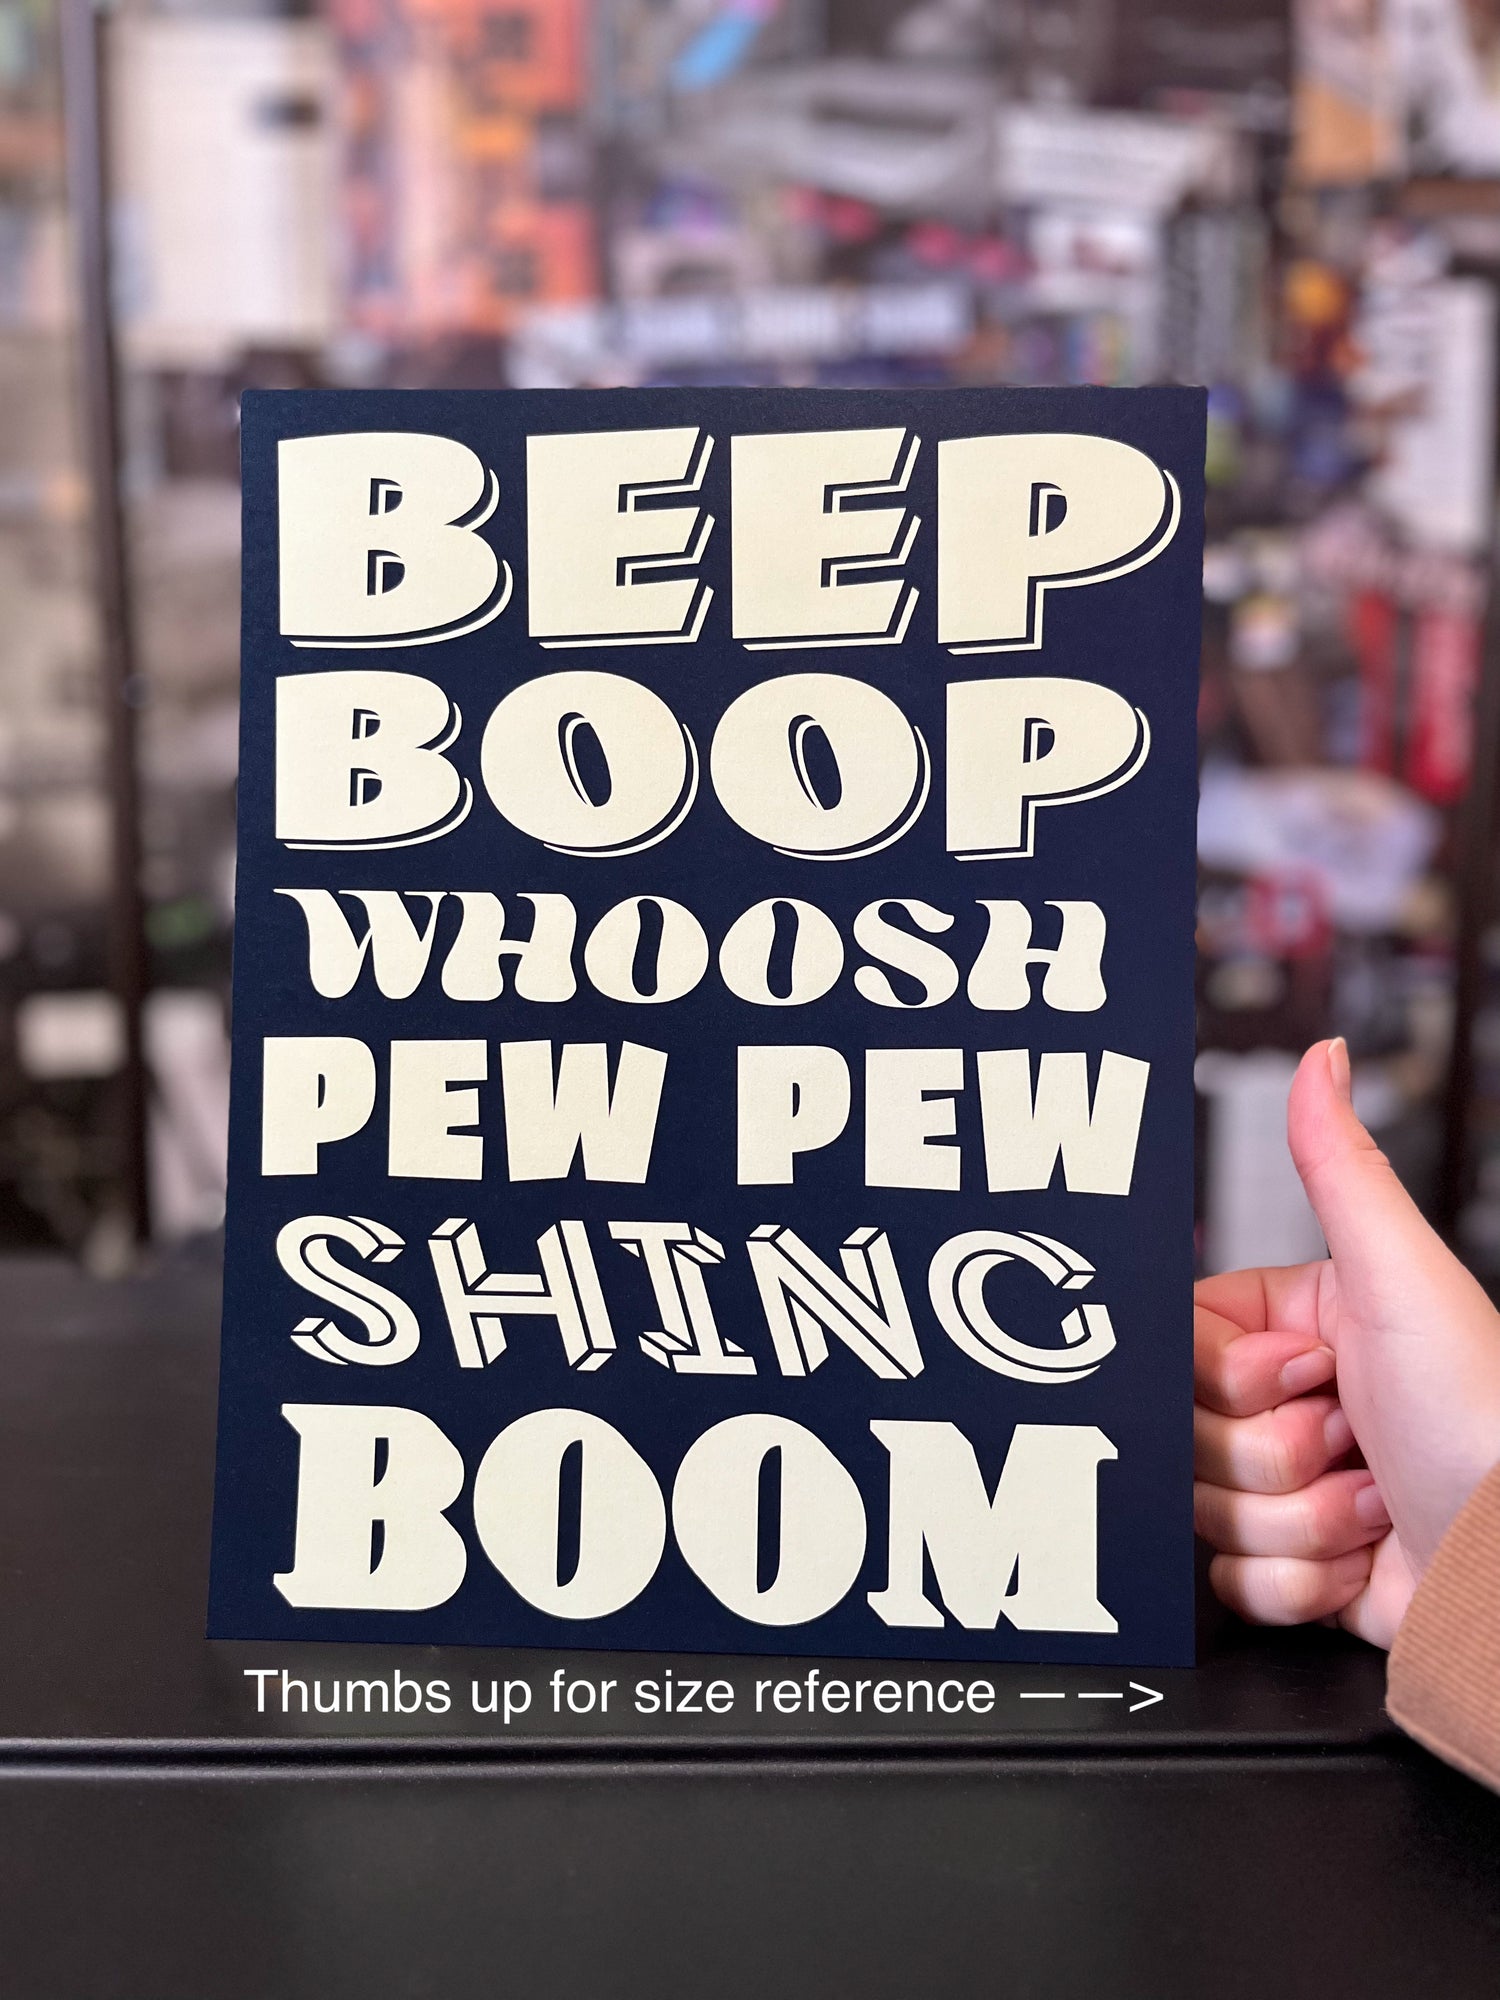 SFX Sounds audio engineer inspired print with the words beep boop, whoosh pew pew, shing, boom printed in cream on navy